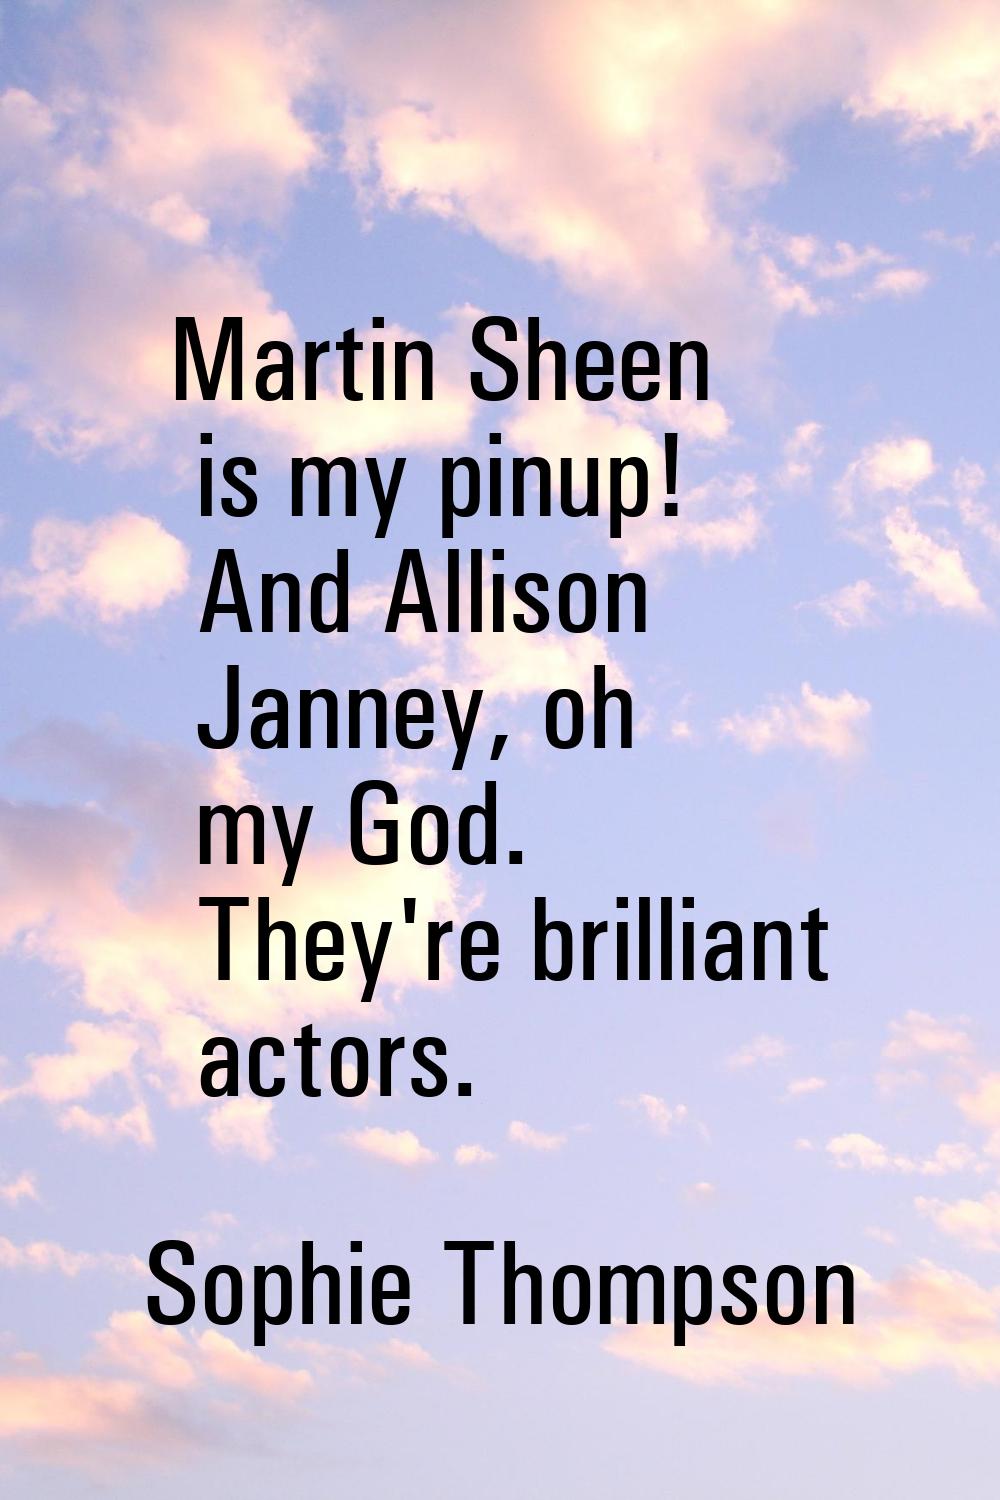 Martin Sheen is my pinup! And Allison Janney, oh my God. They're brilliant actors.